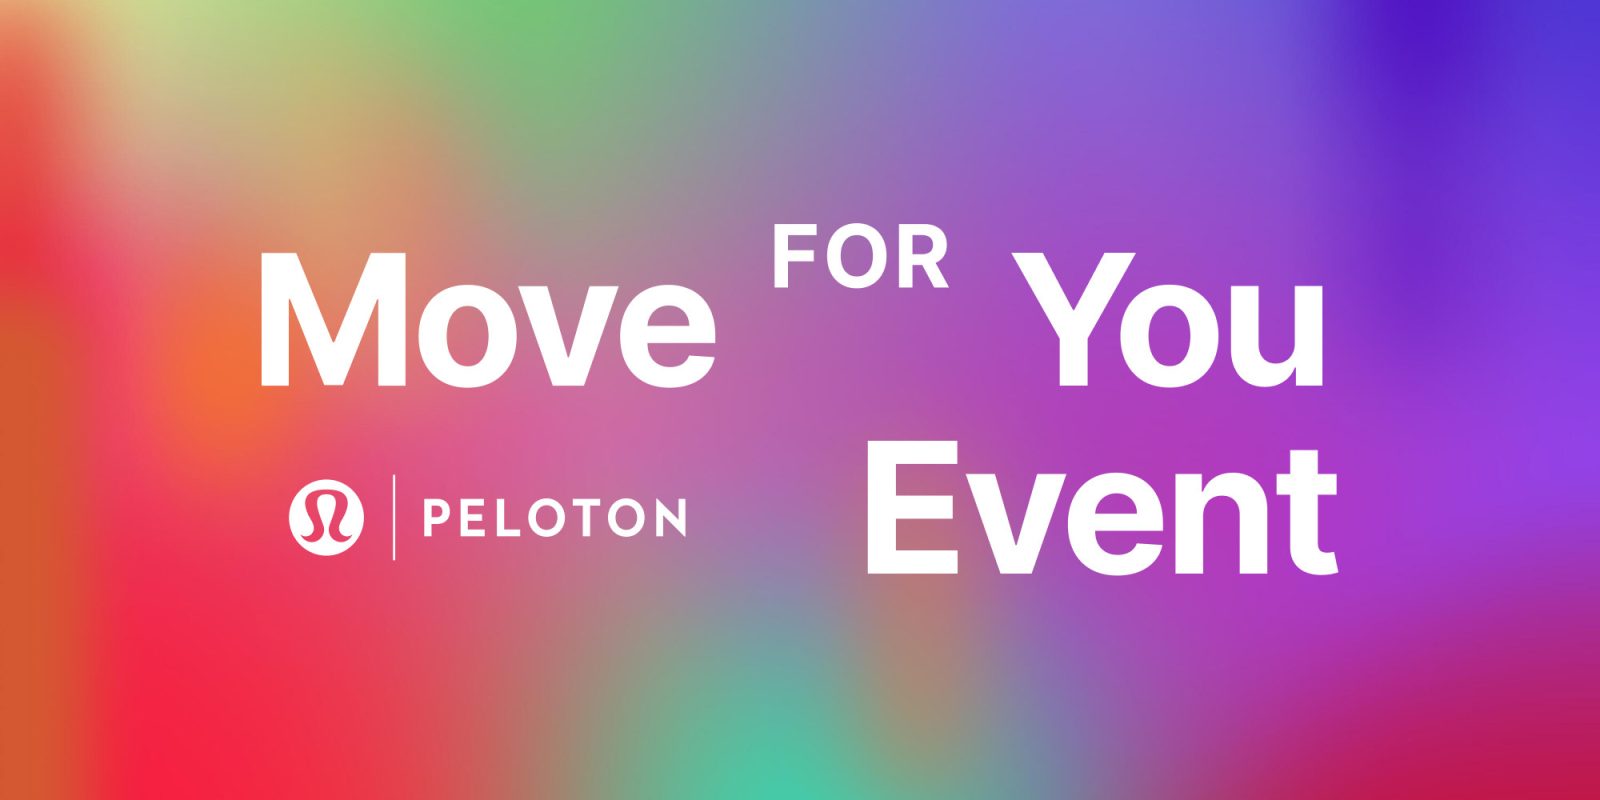 Work up a sweat with Peloton x lululemon Move For You Event